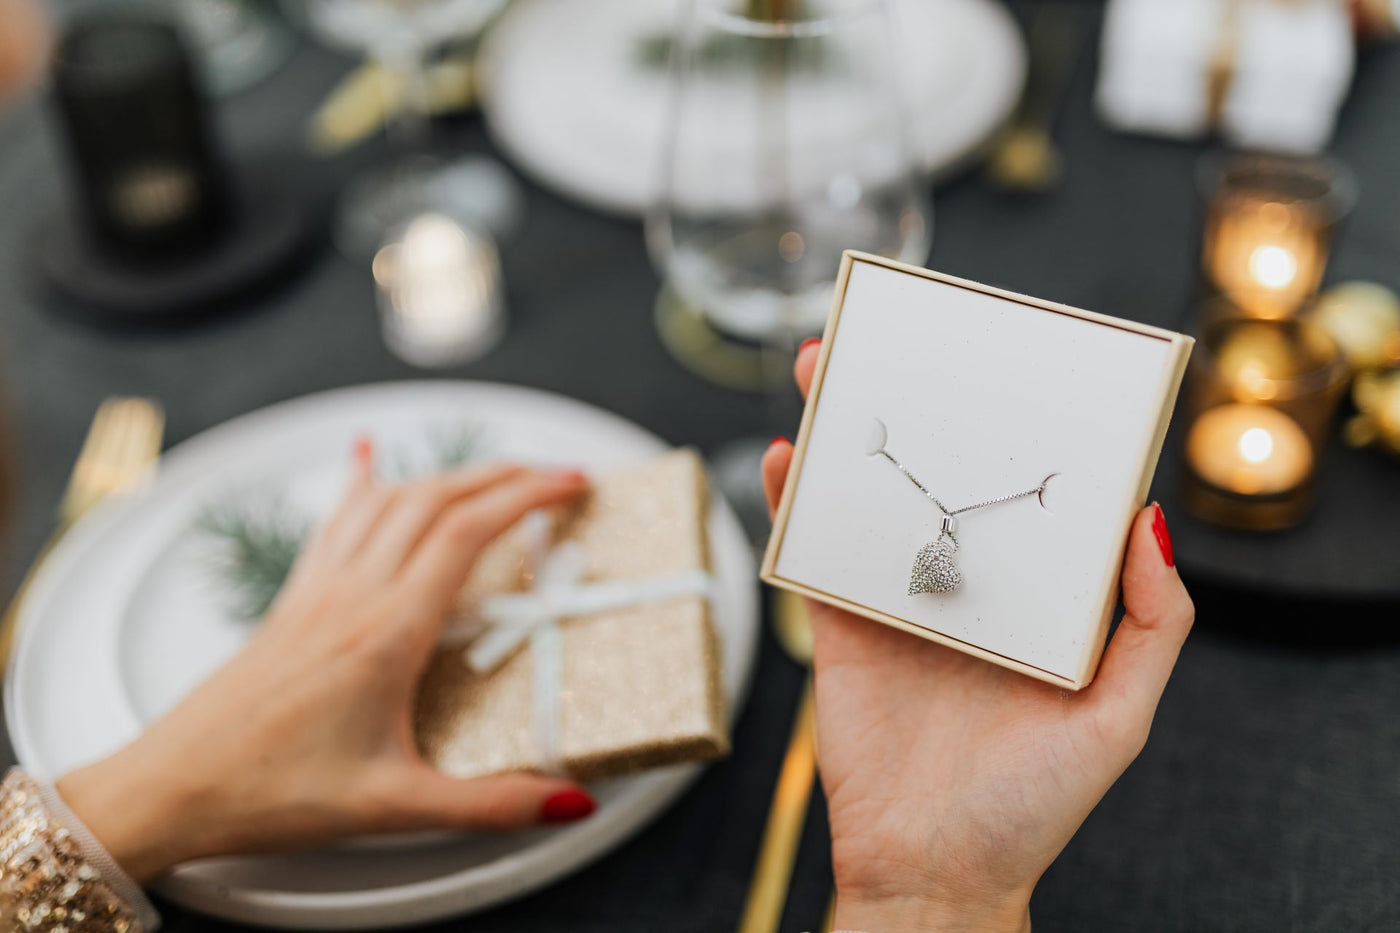 Woman at a dining table with fancy settings, opening a holiday jewelry gift for her